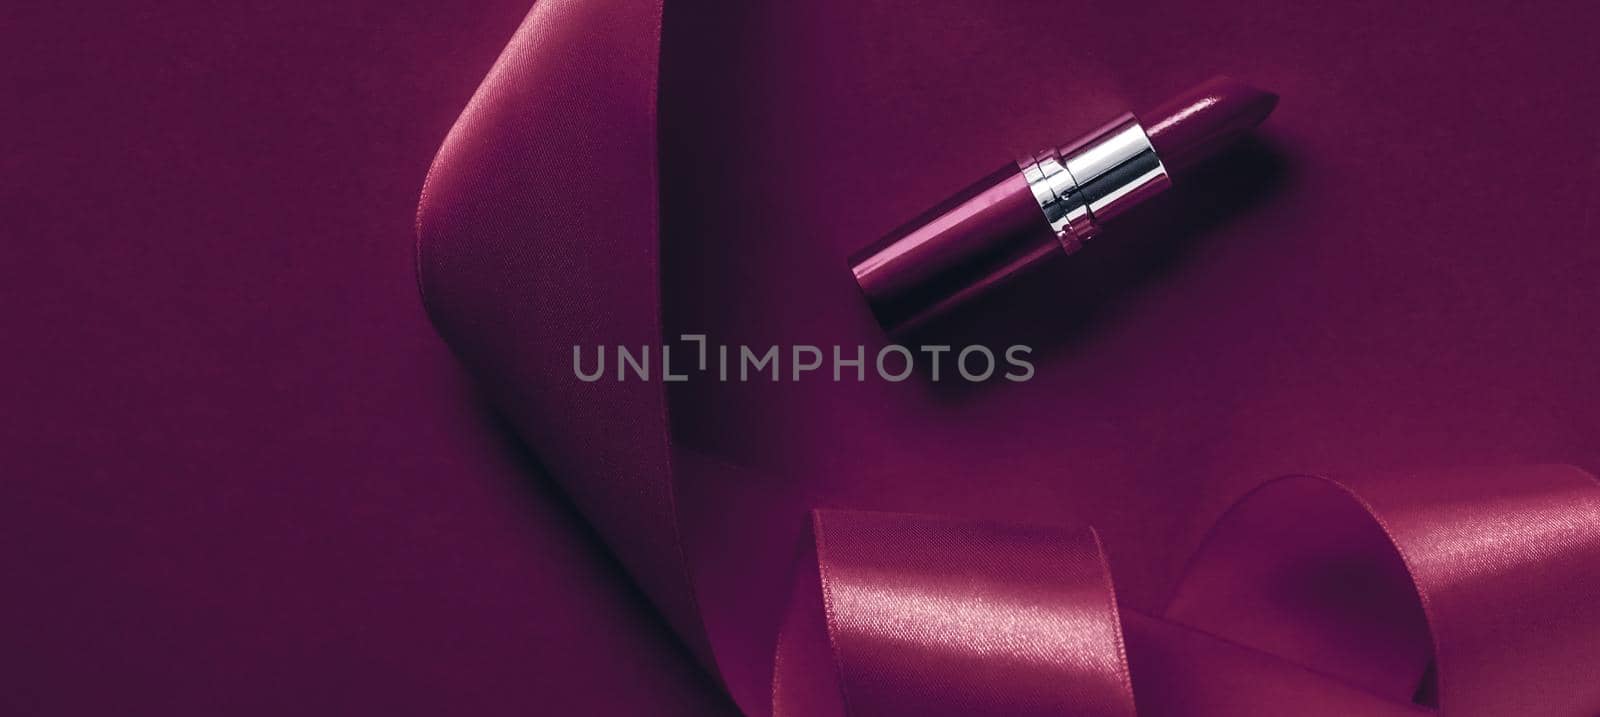 Luxury lipstick and silk ribbon on plum holiday background, make-up and cosmetics flatlay for beauty brand product design by Anneleven